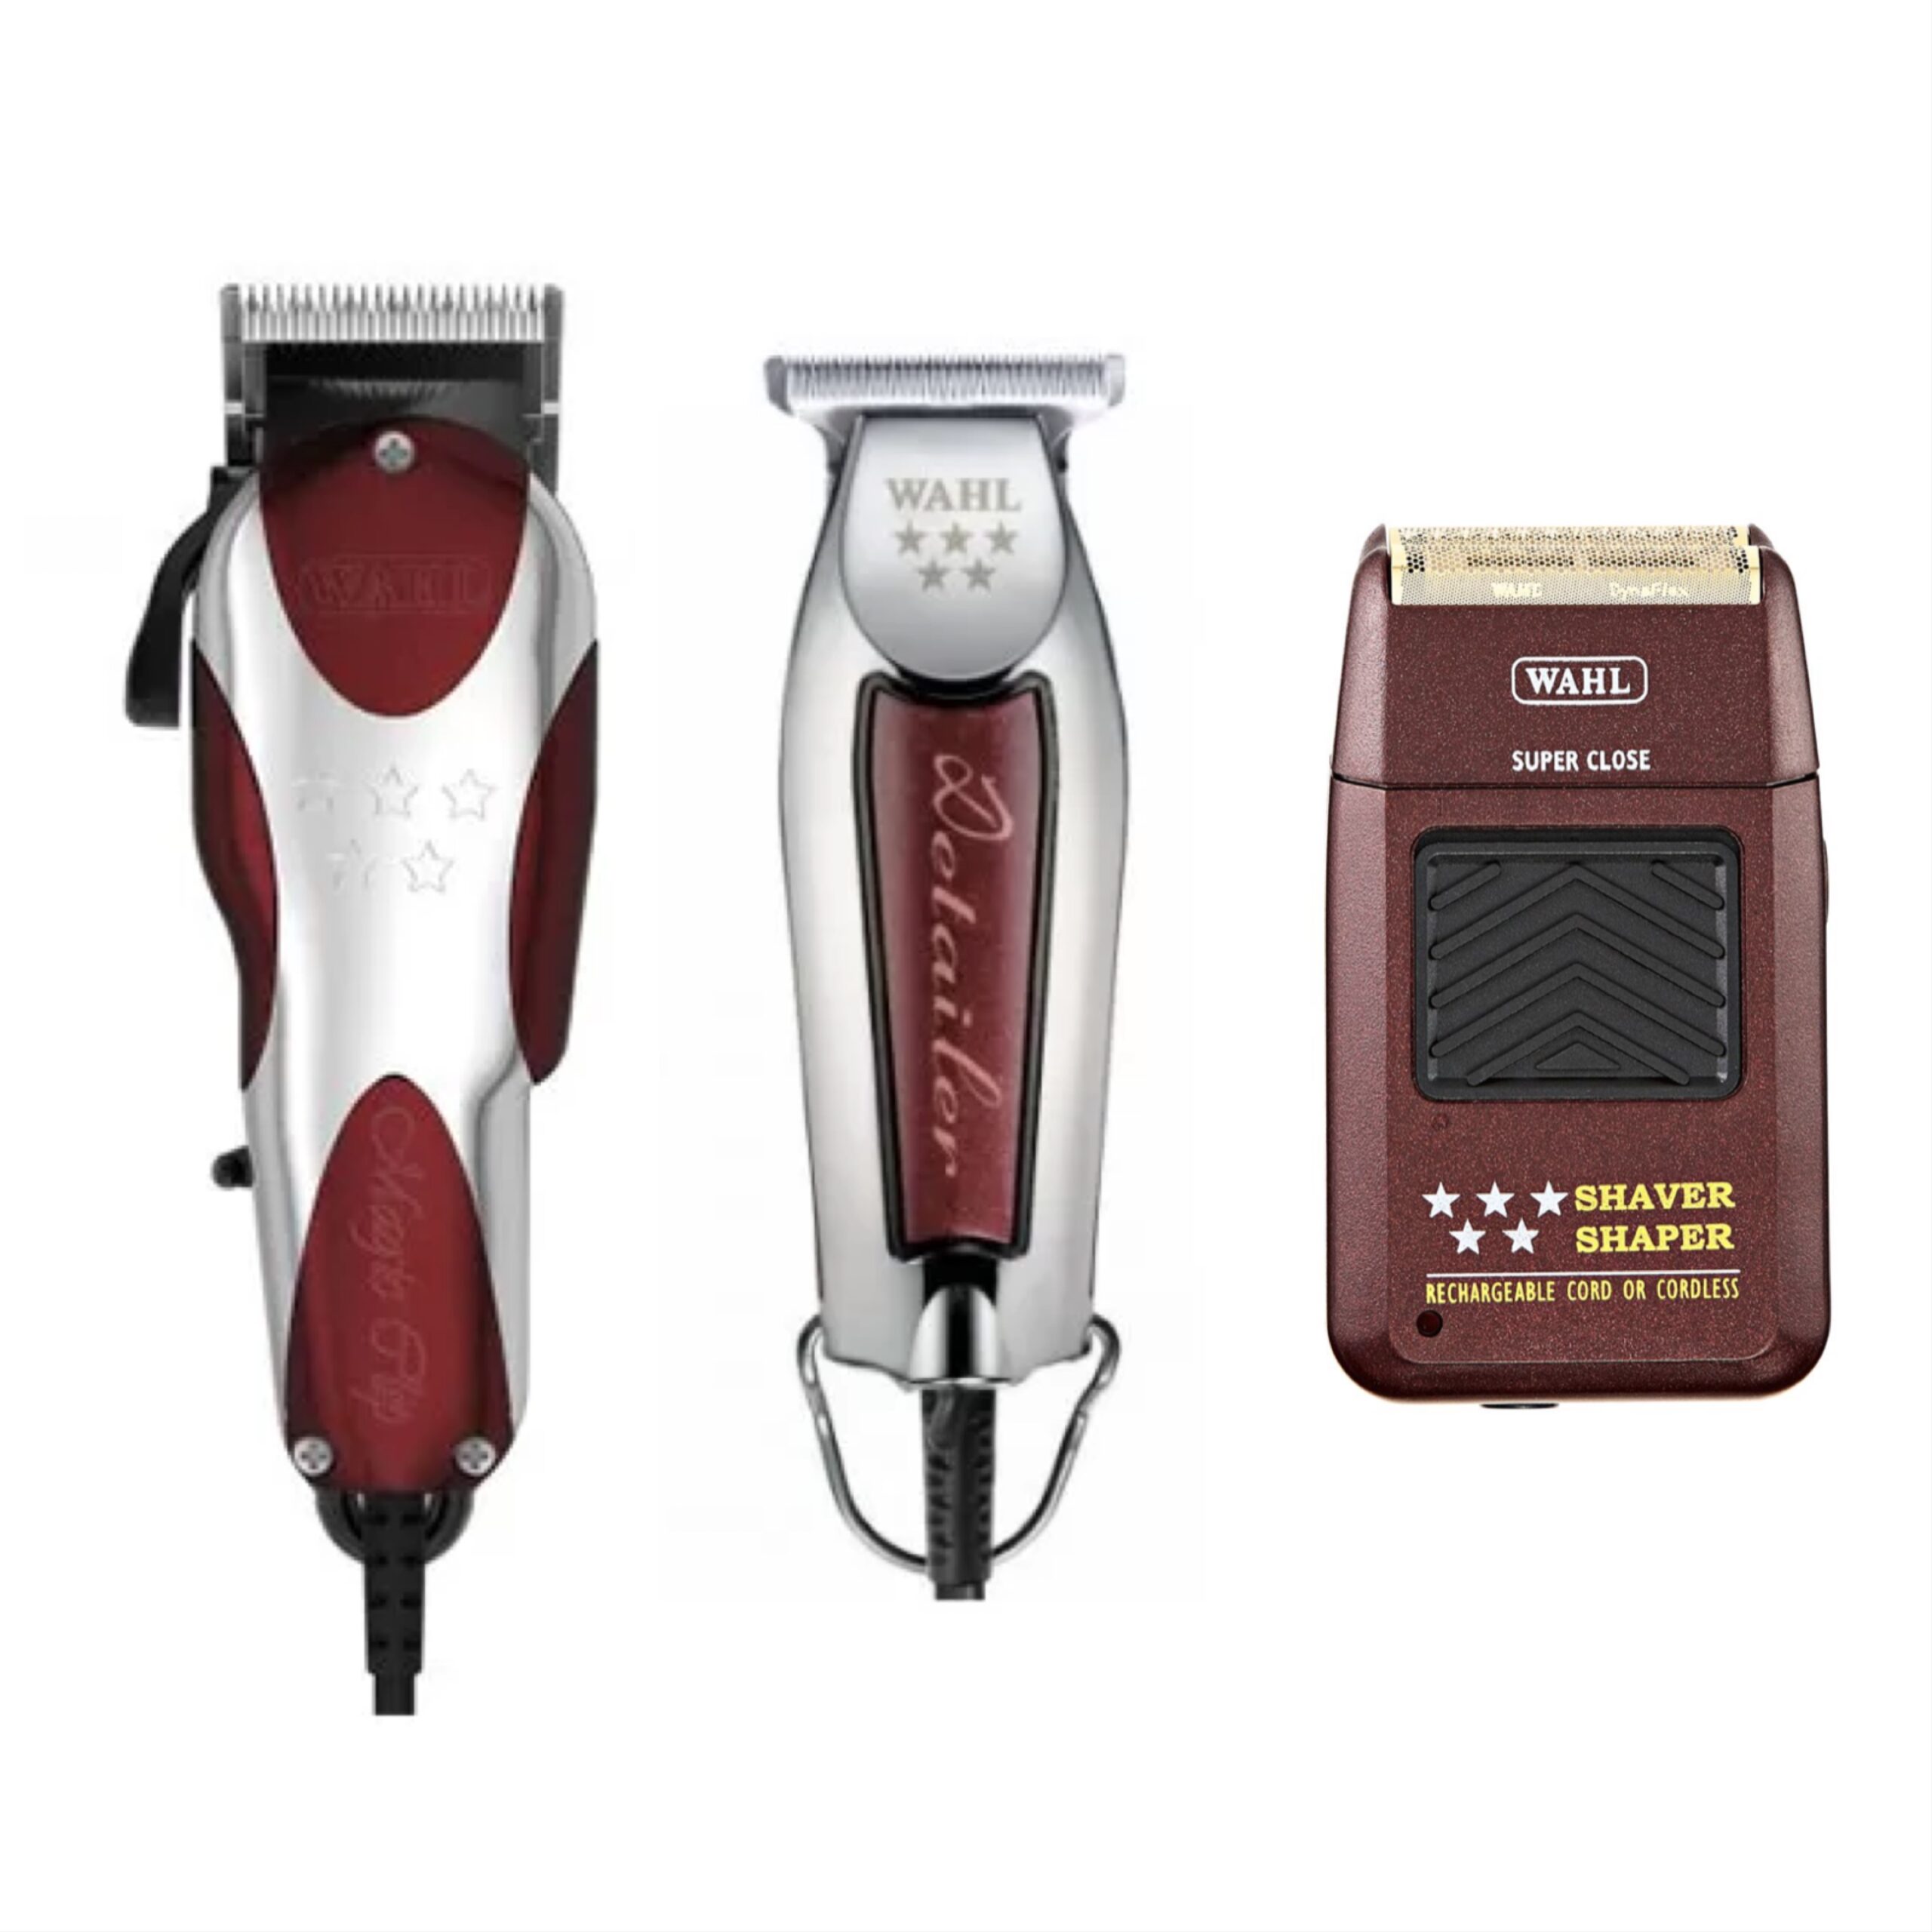 Wahl pro 3pc combo by ibs - Corded magic clip